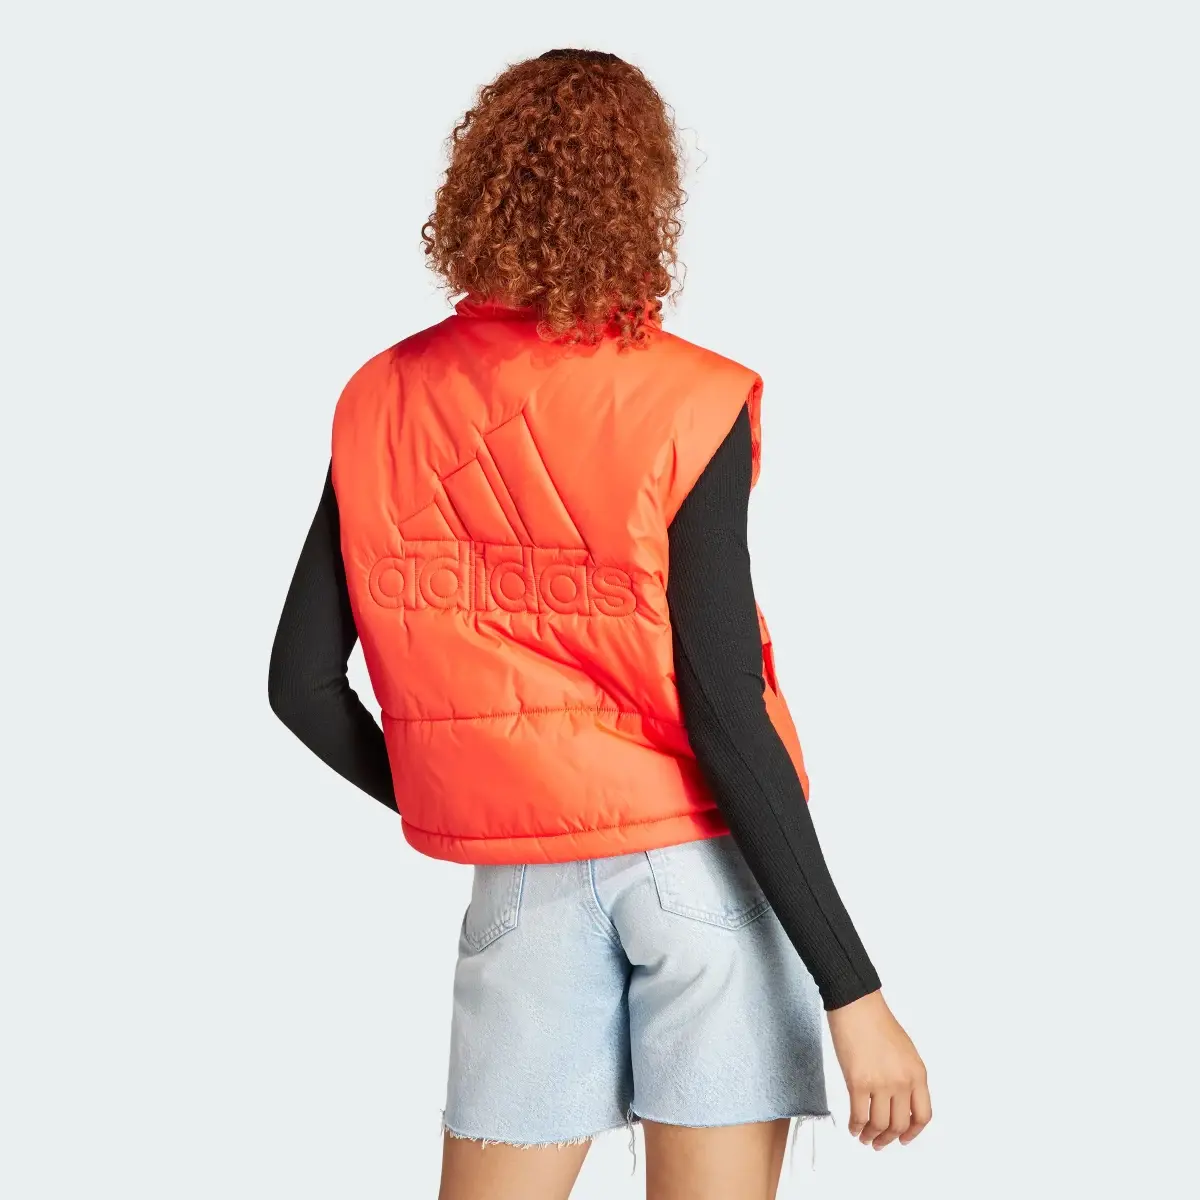 Adidas 3-Stripes Insulated Vest. 3